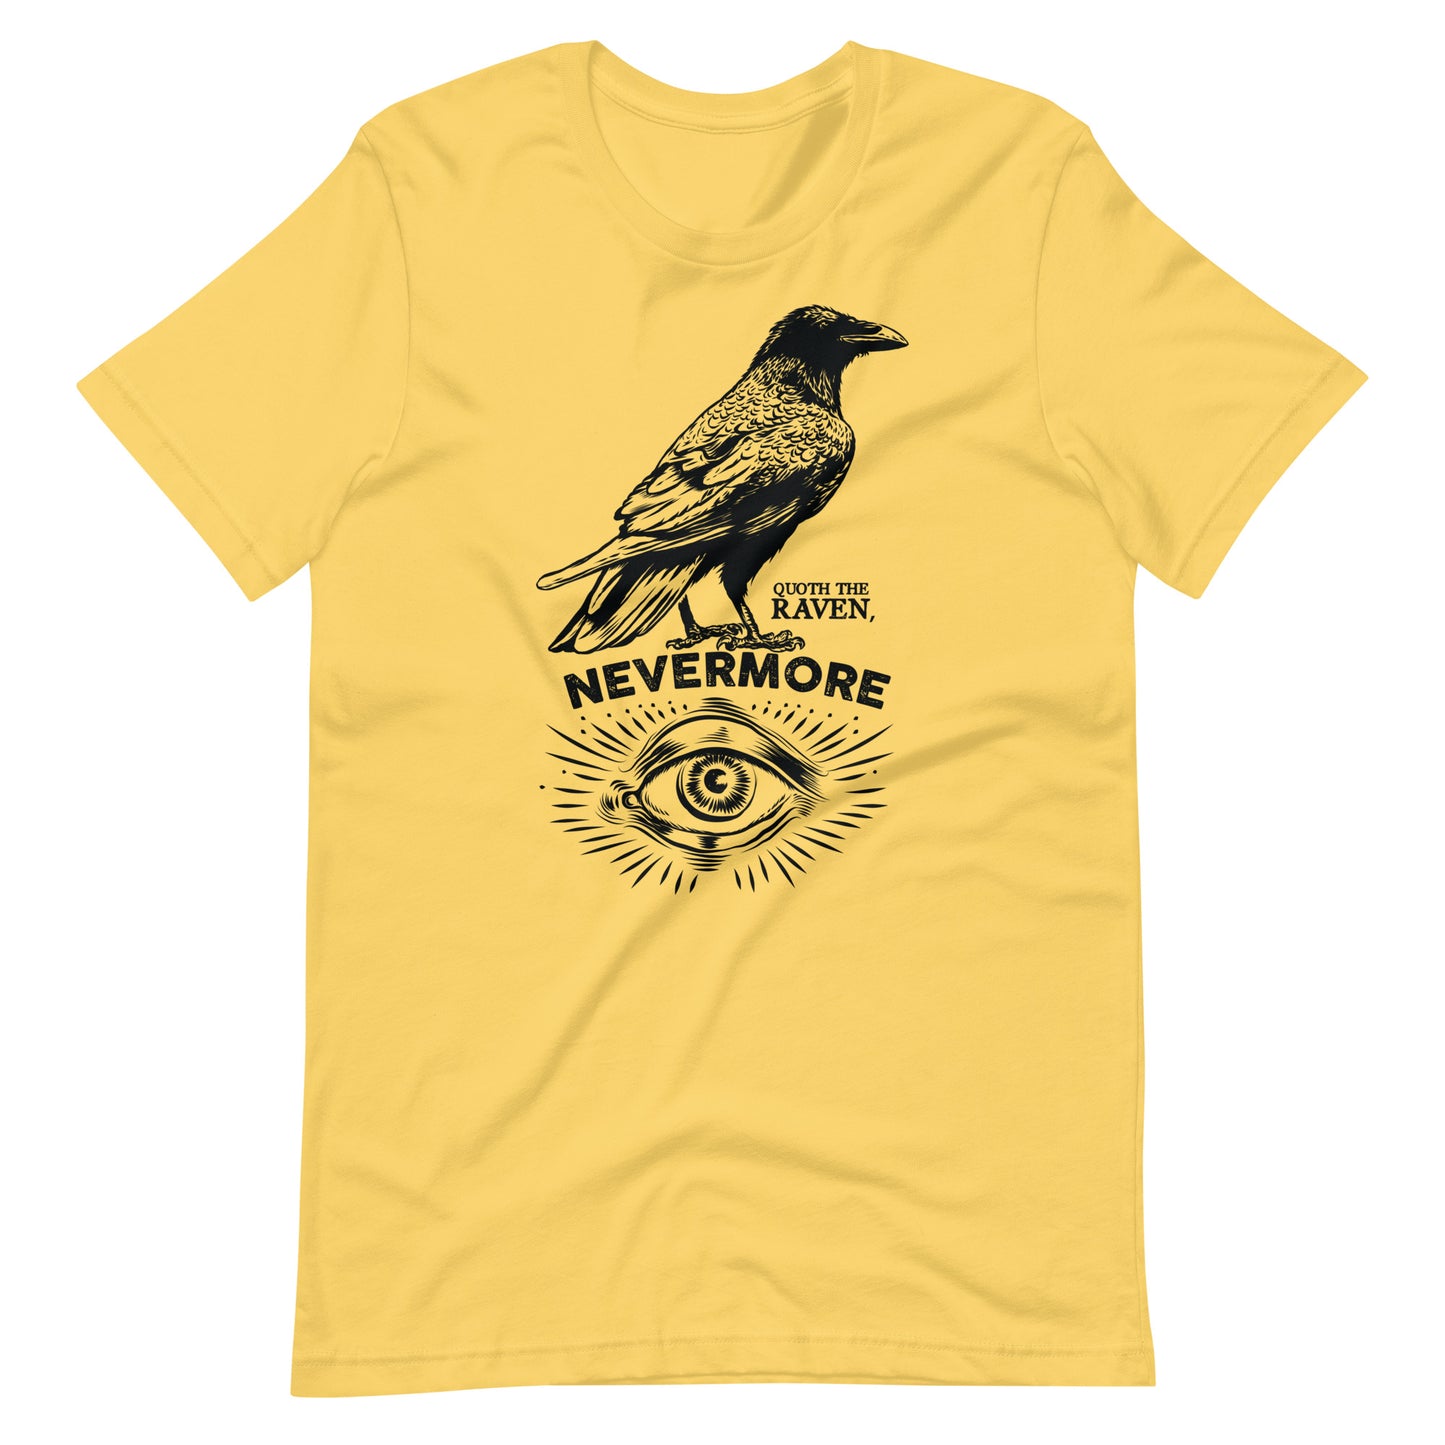 Quoth the Raven Nevermore - Men's t-shirt - Yellow Front